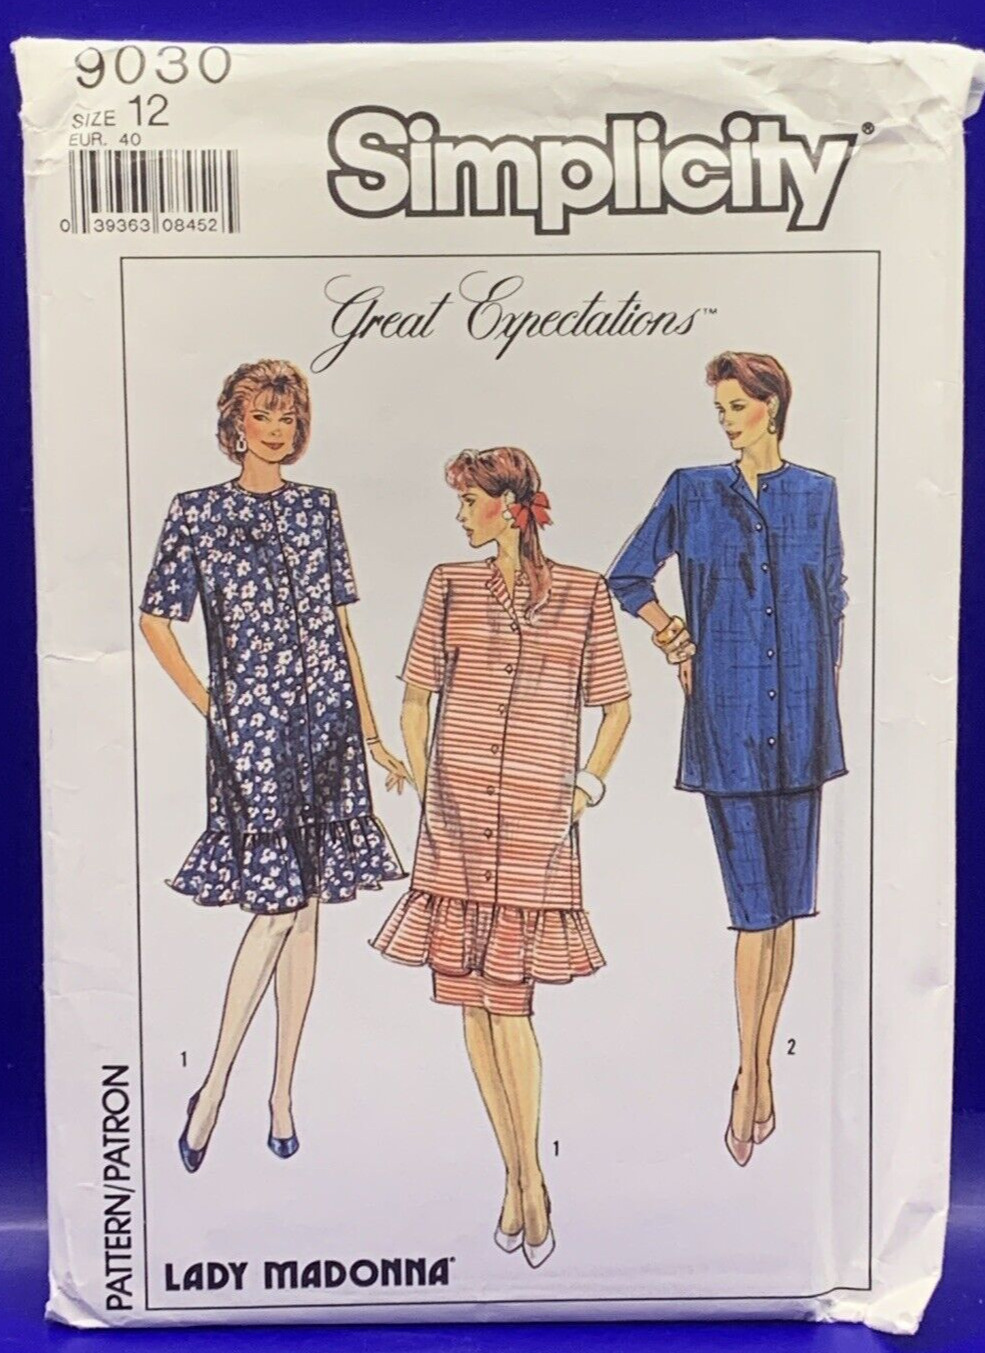 1980\'s Maternity Fashion Simplicity 9030 Pattern Great Expectations Lady Madonna